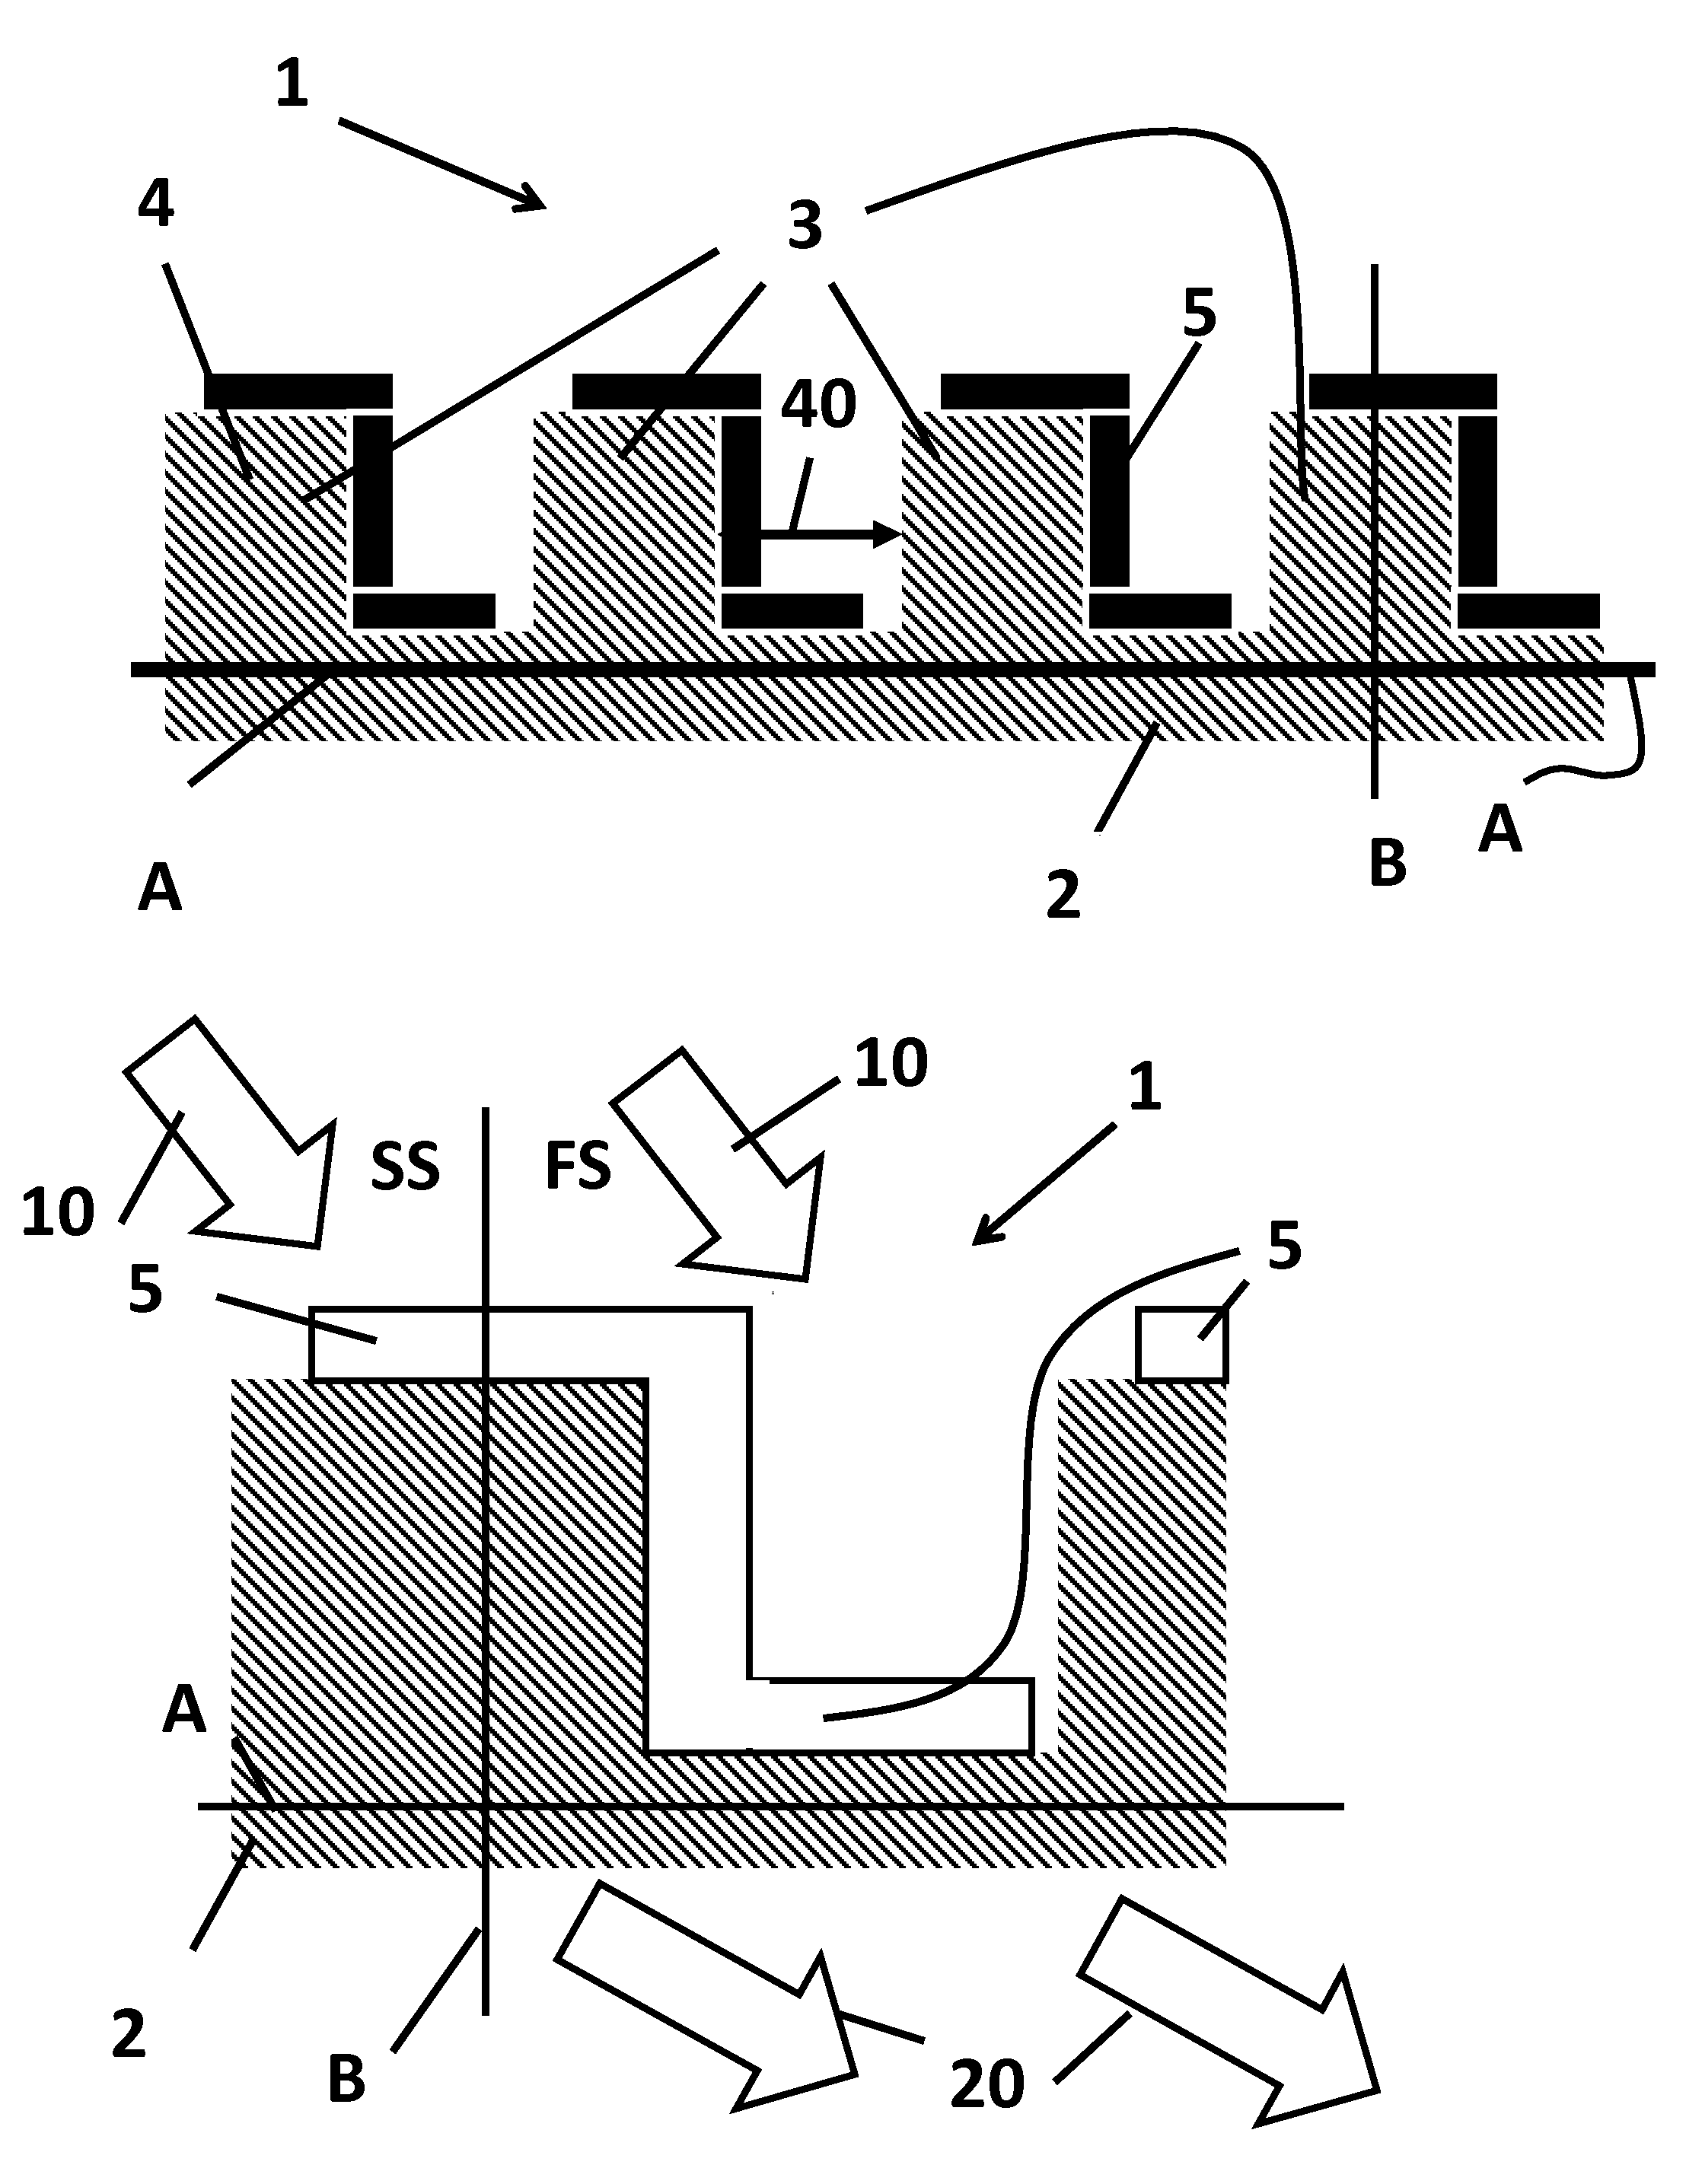 Optical grating coupling structure